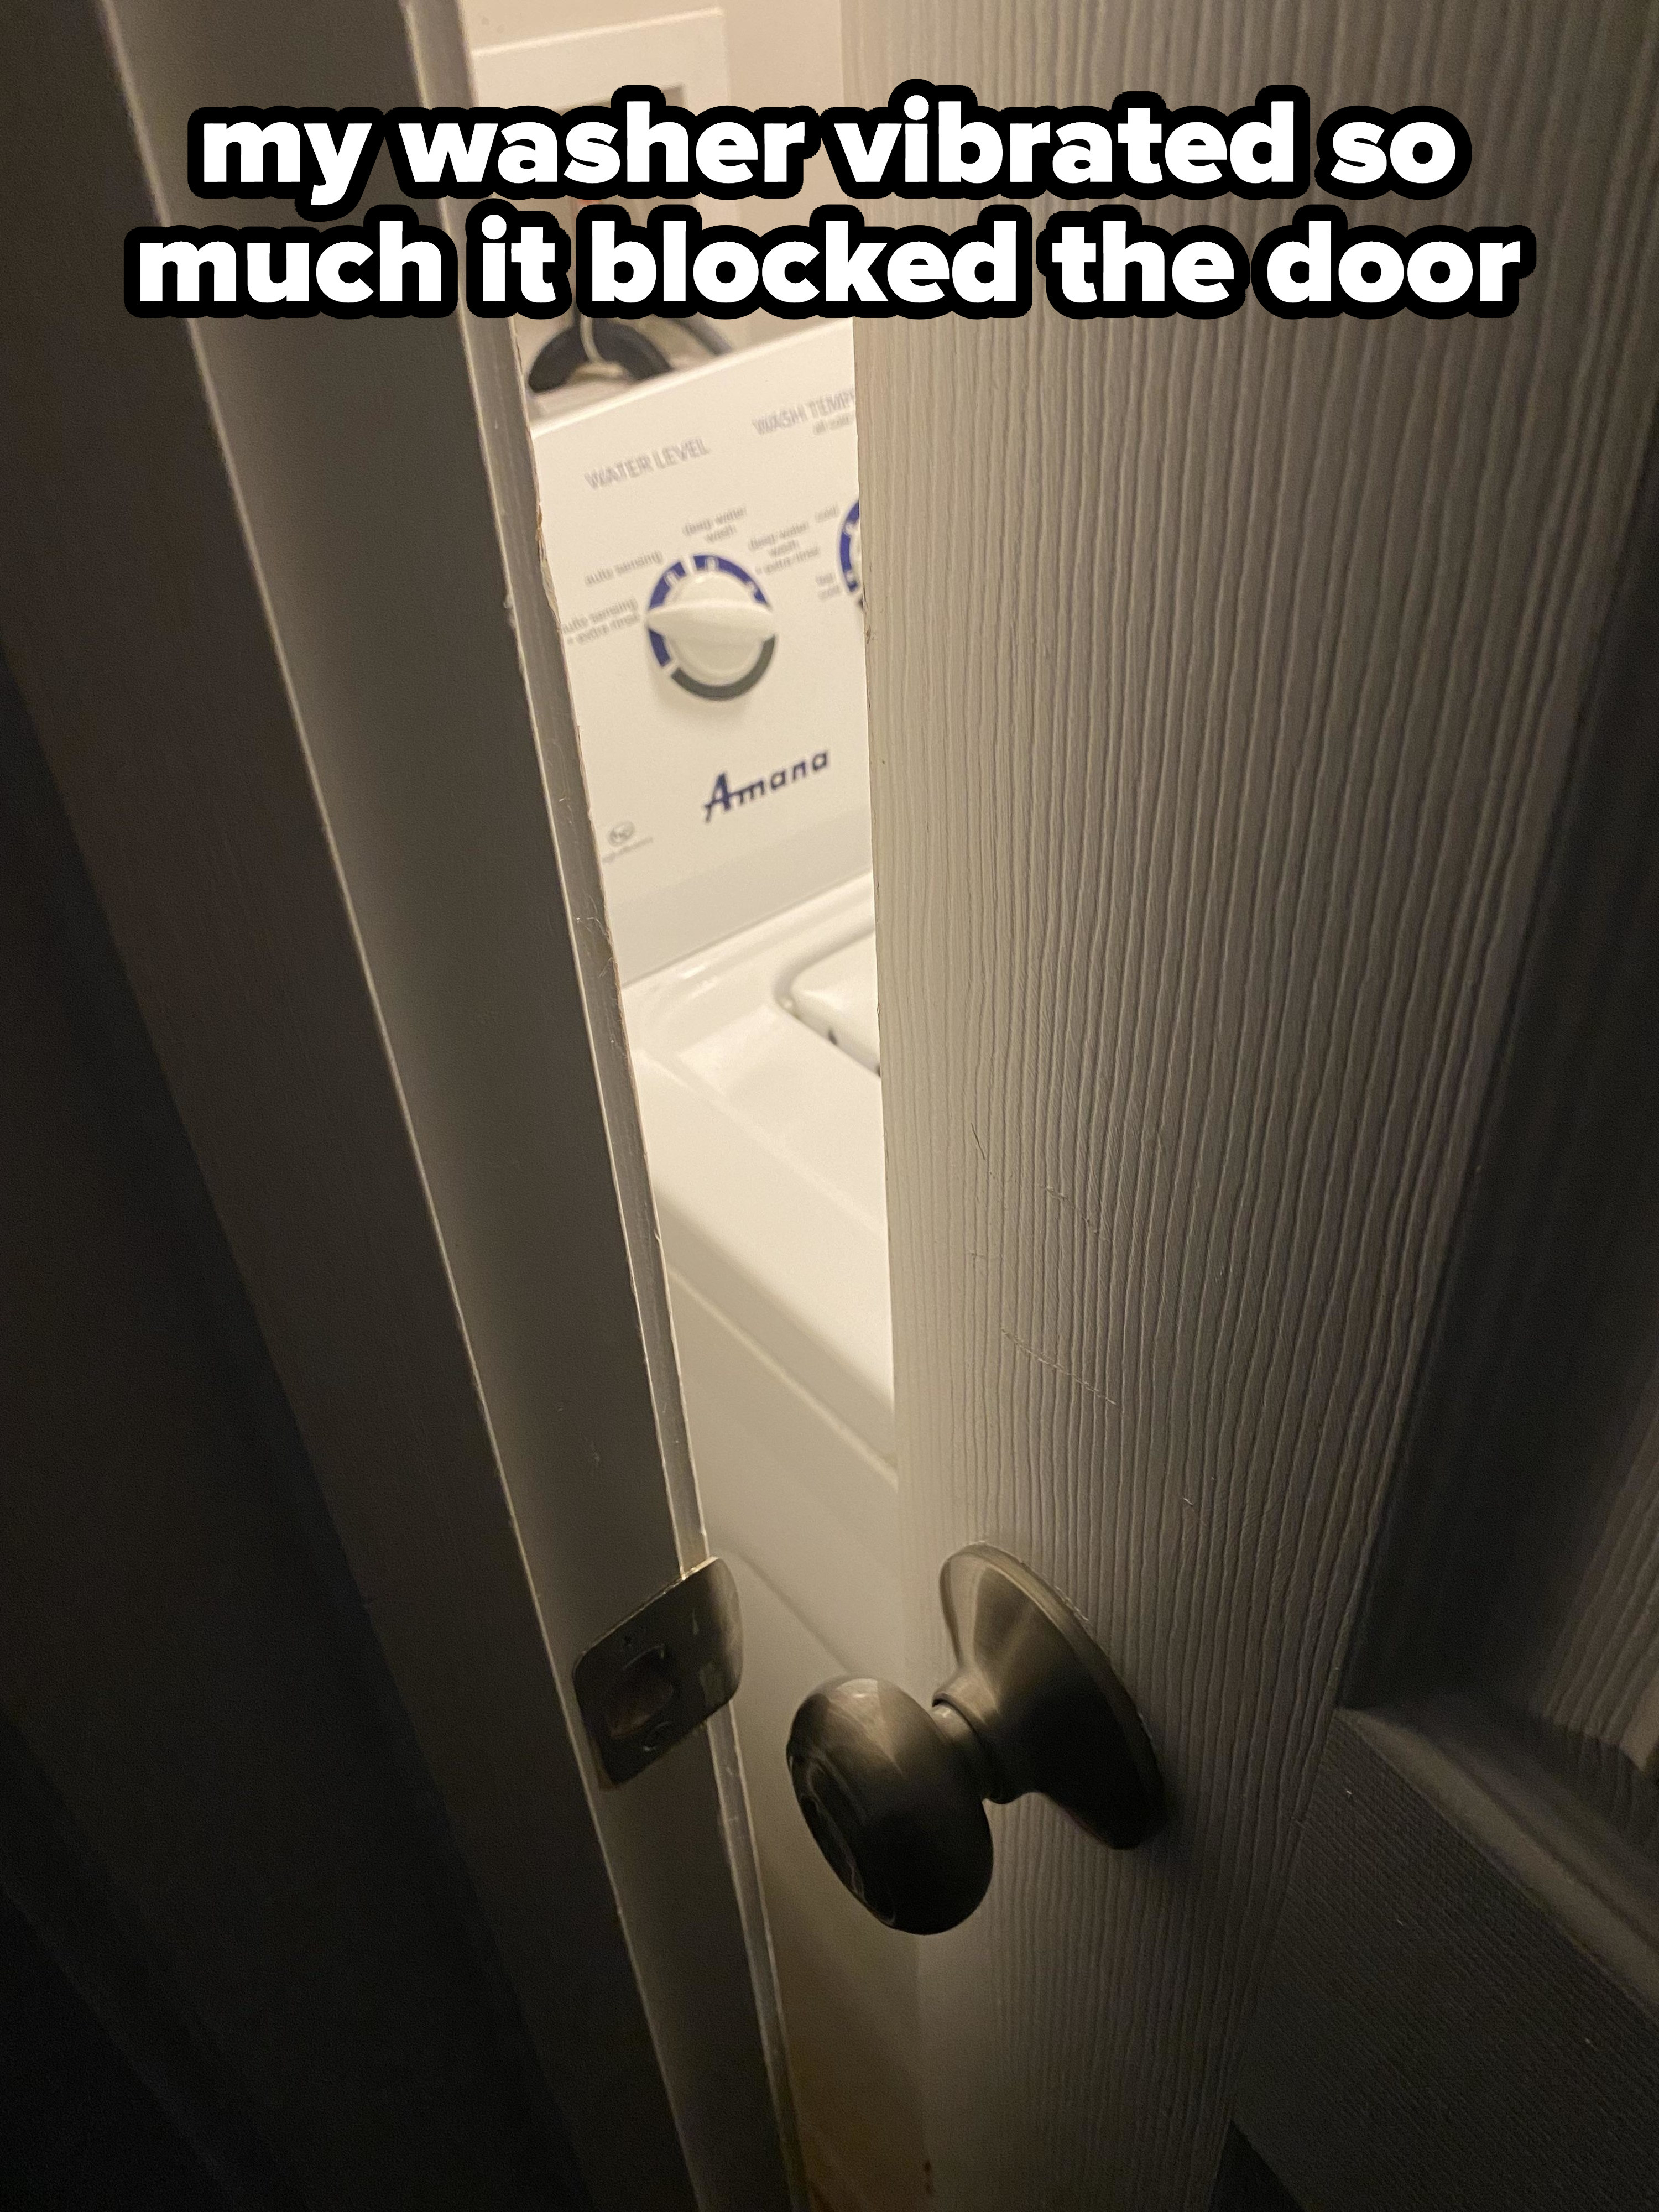 &quot;my washer vibrated so much it blocked the door&quot;